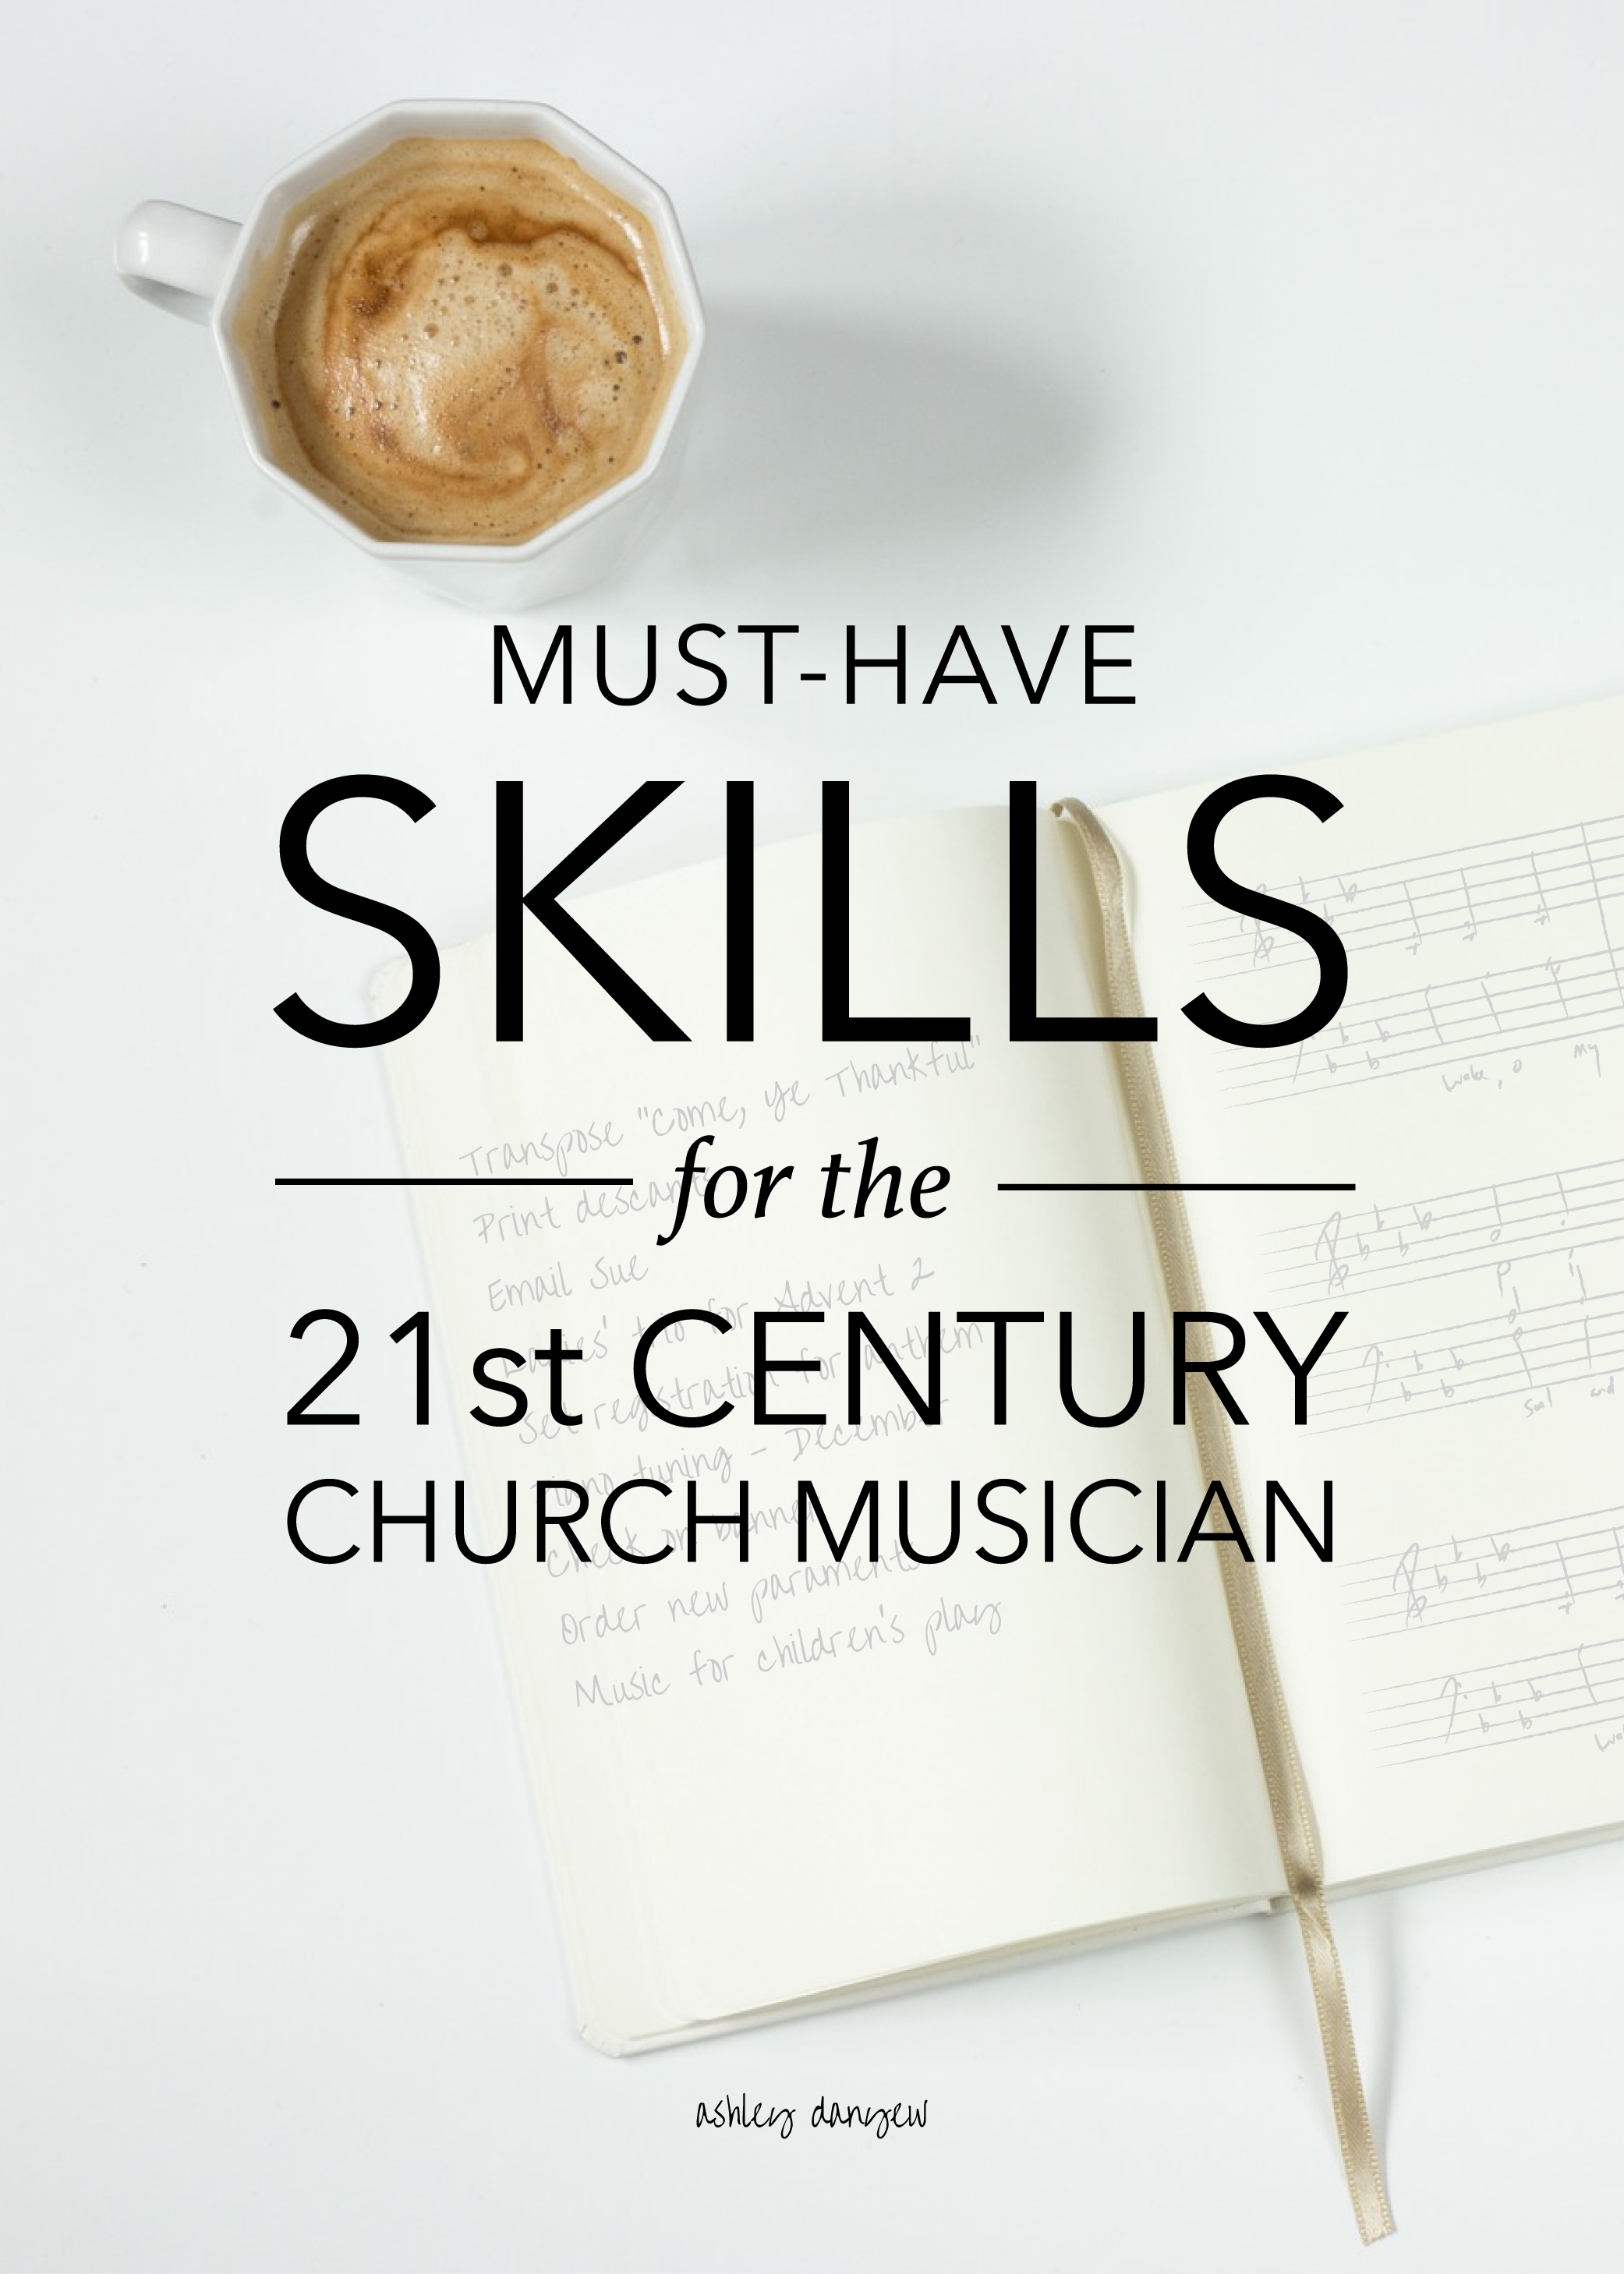 Copy of Must-Have Skills for the 21st Century Church Musician